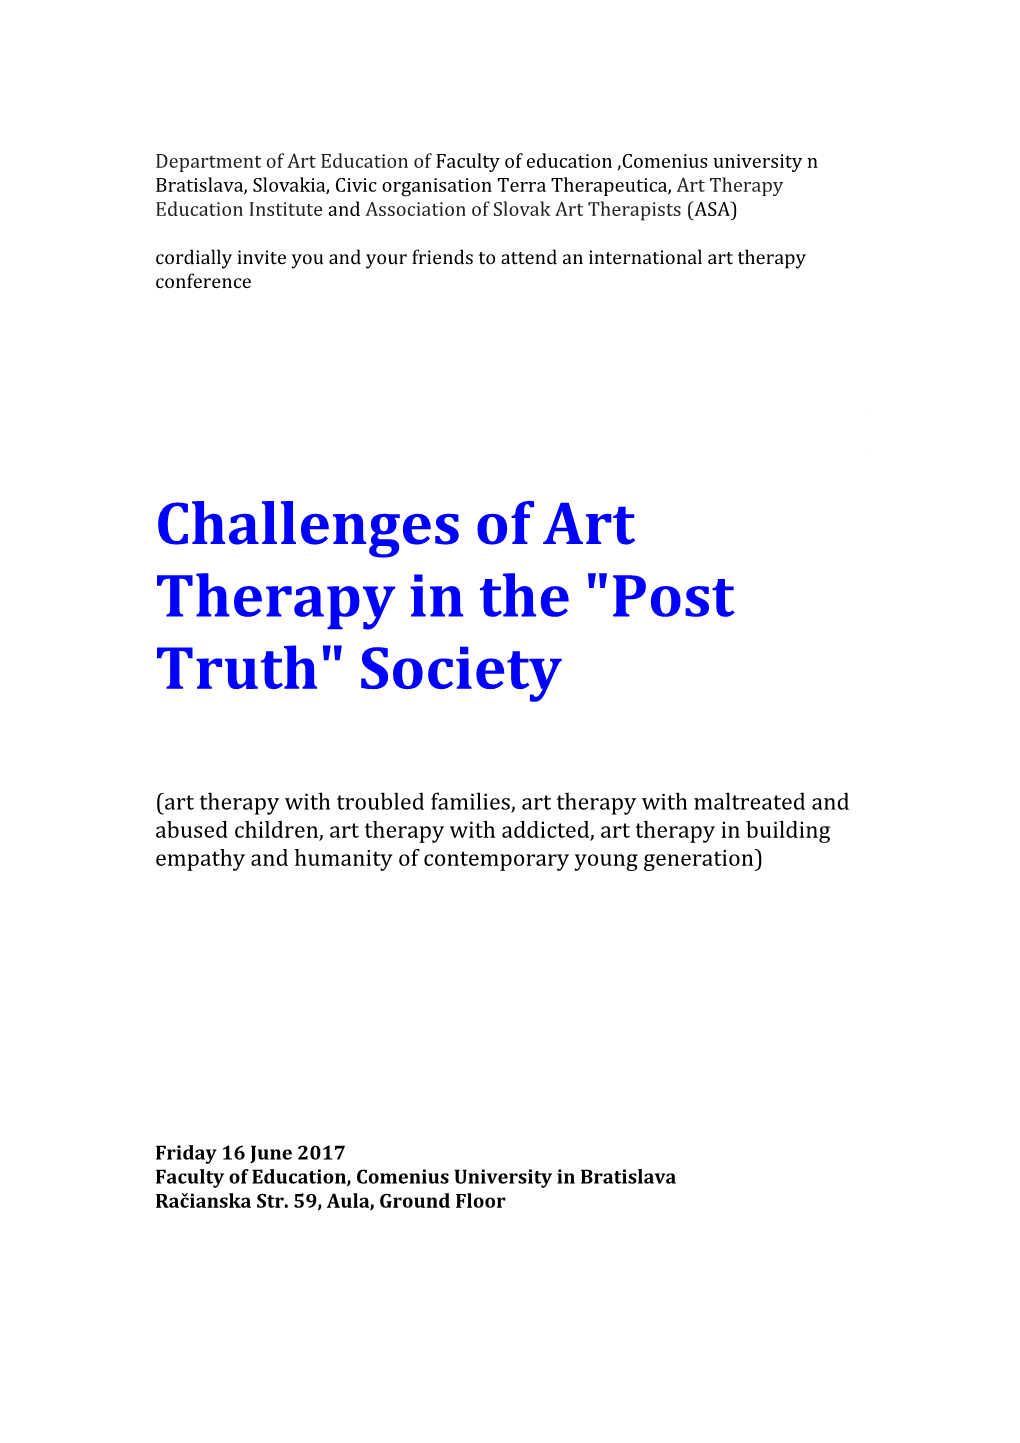 Challenges of Art Therapy in the Post Truth Society